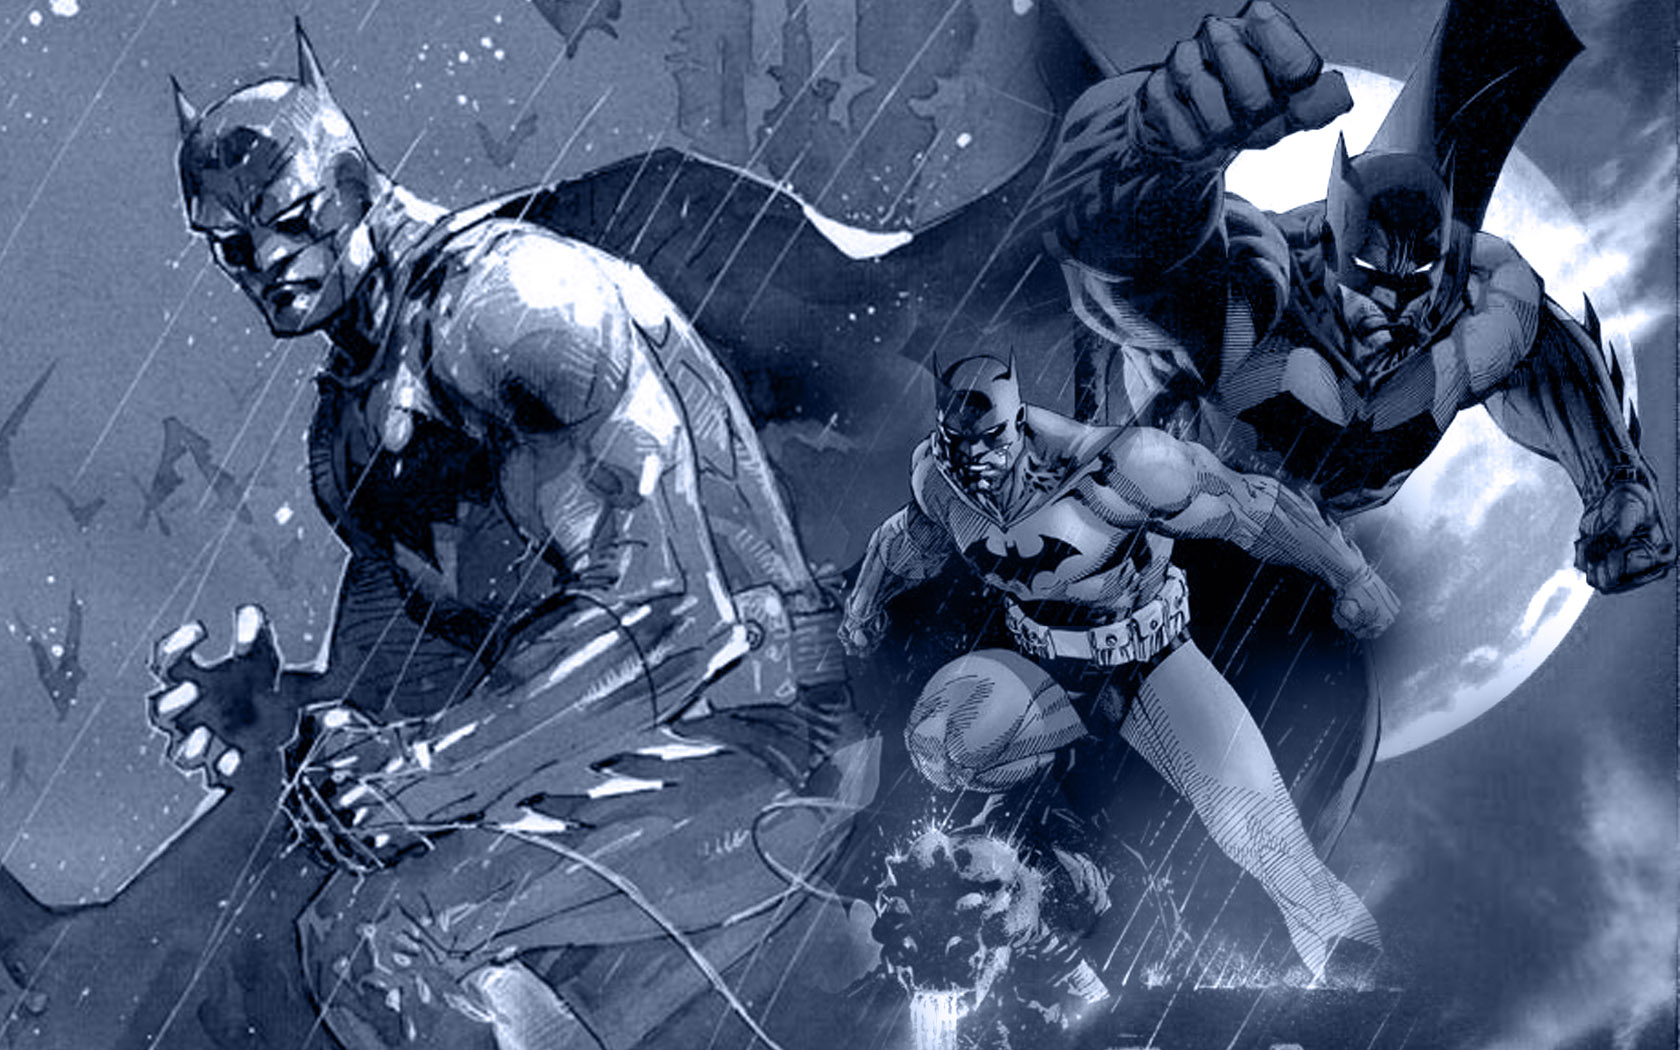 Batman wallpapers for desktop, download free Batman pictures and  backgrounds for PC